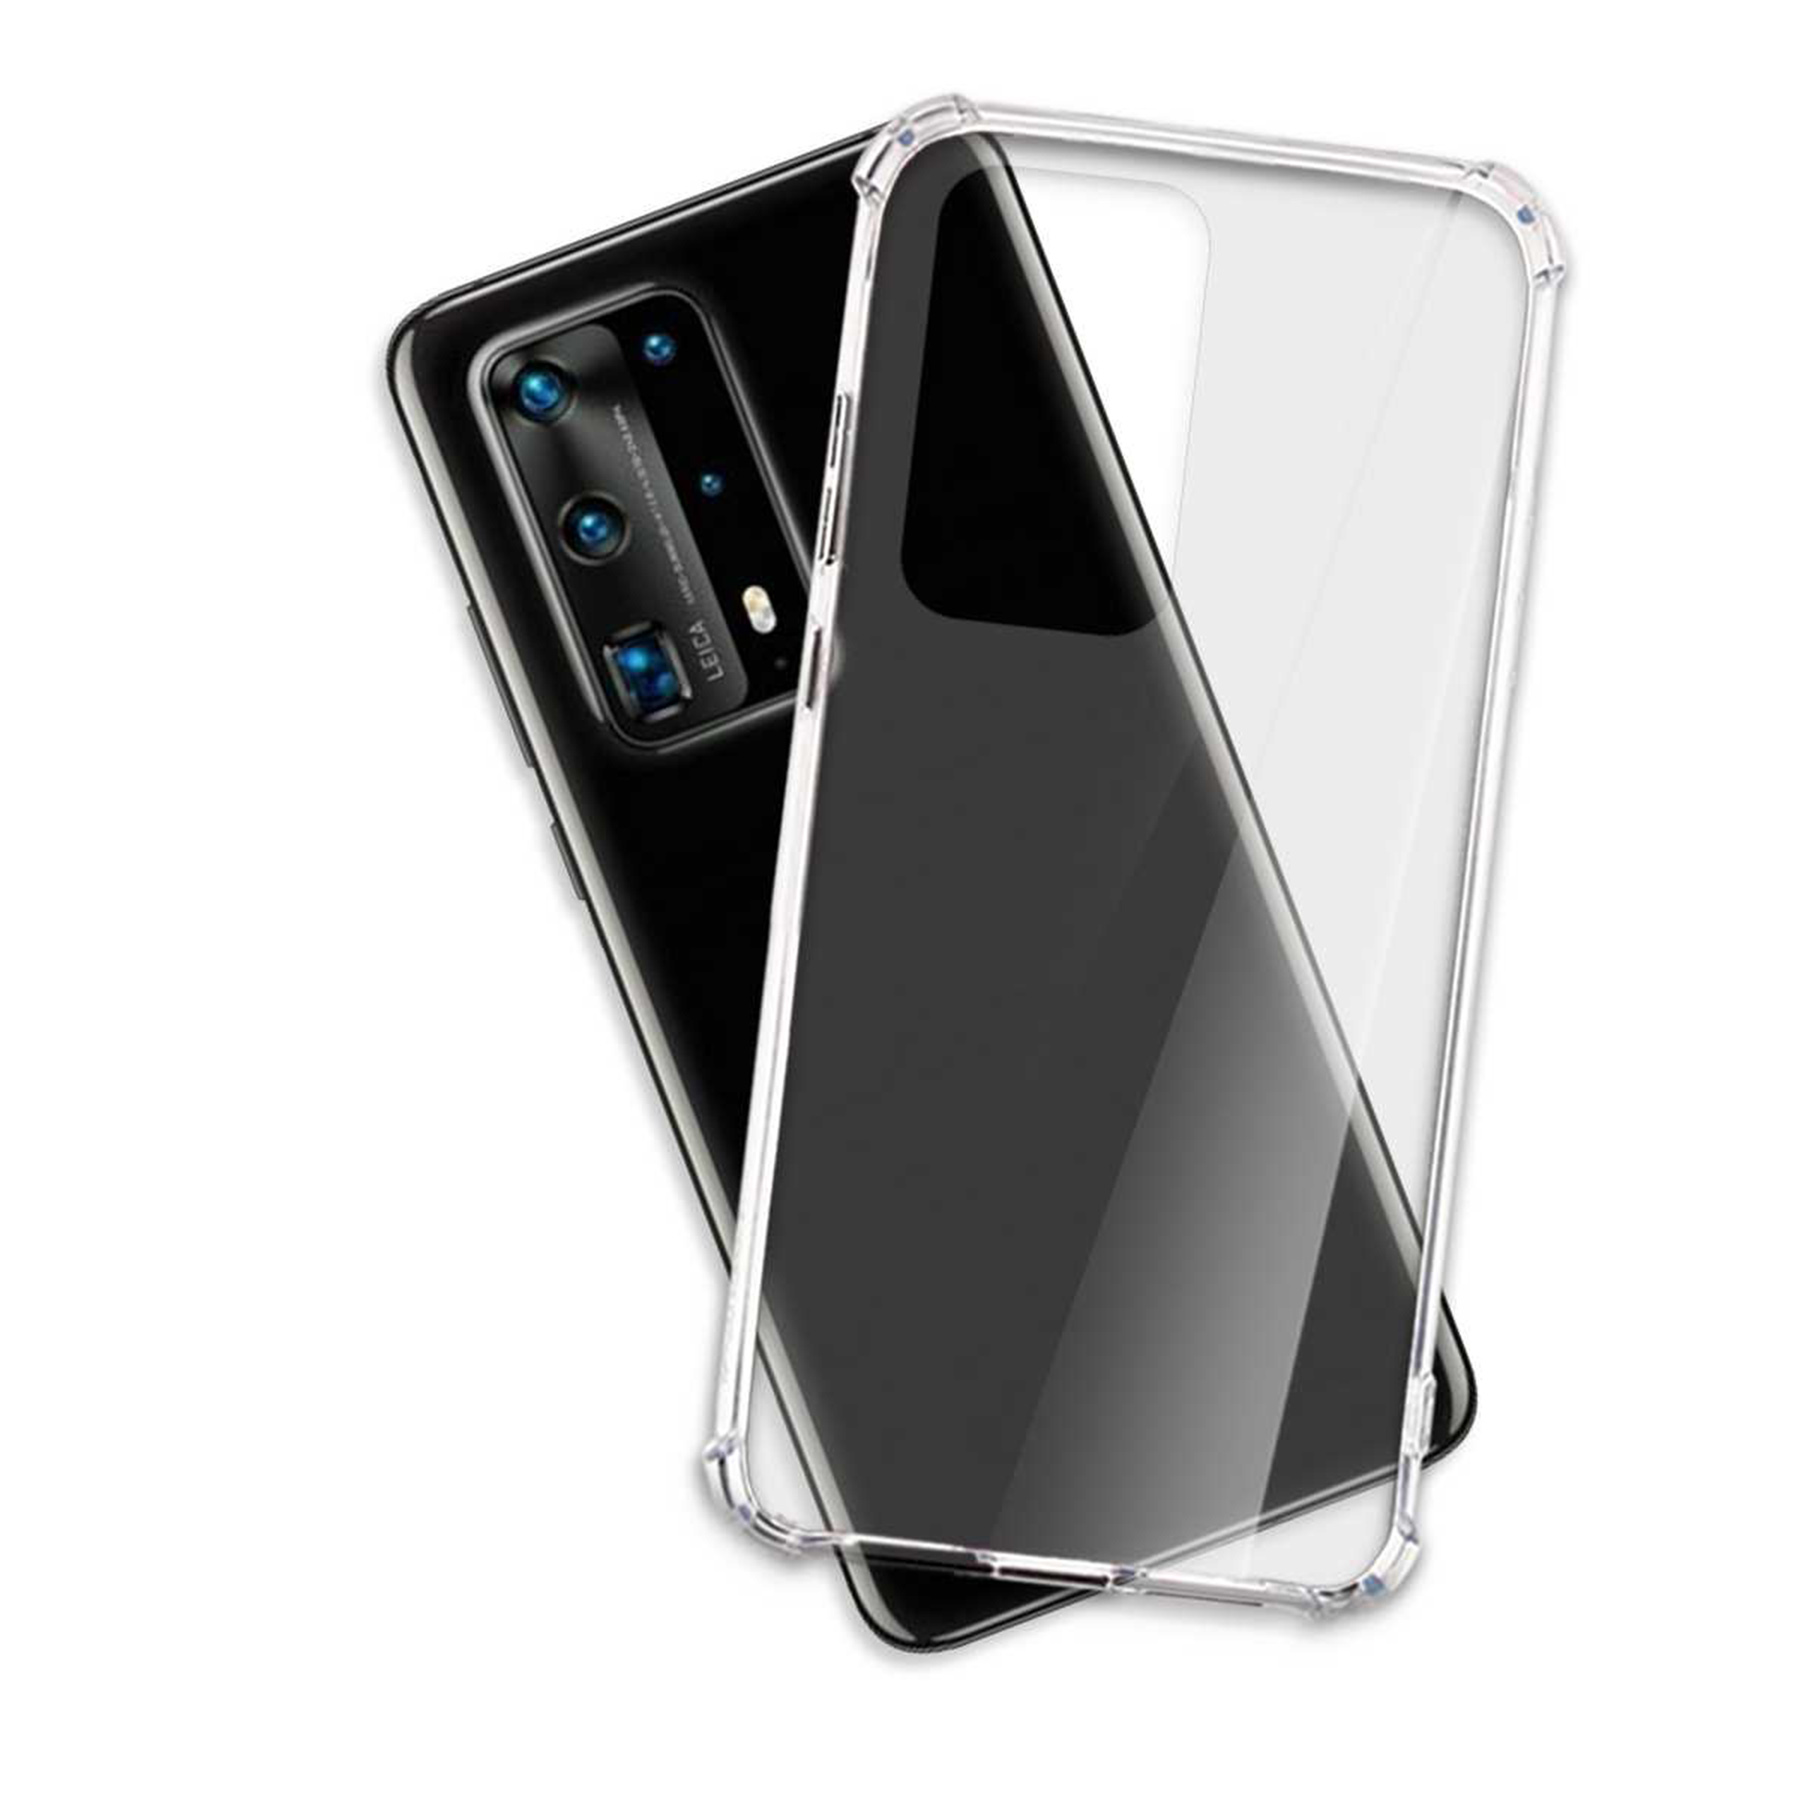 MTB MORE 5G, Plus Pro Huawei, Clear ENERGY P40 Case, Transparent Armor Backcover